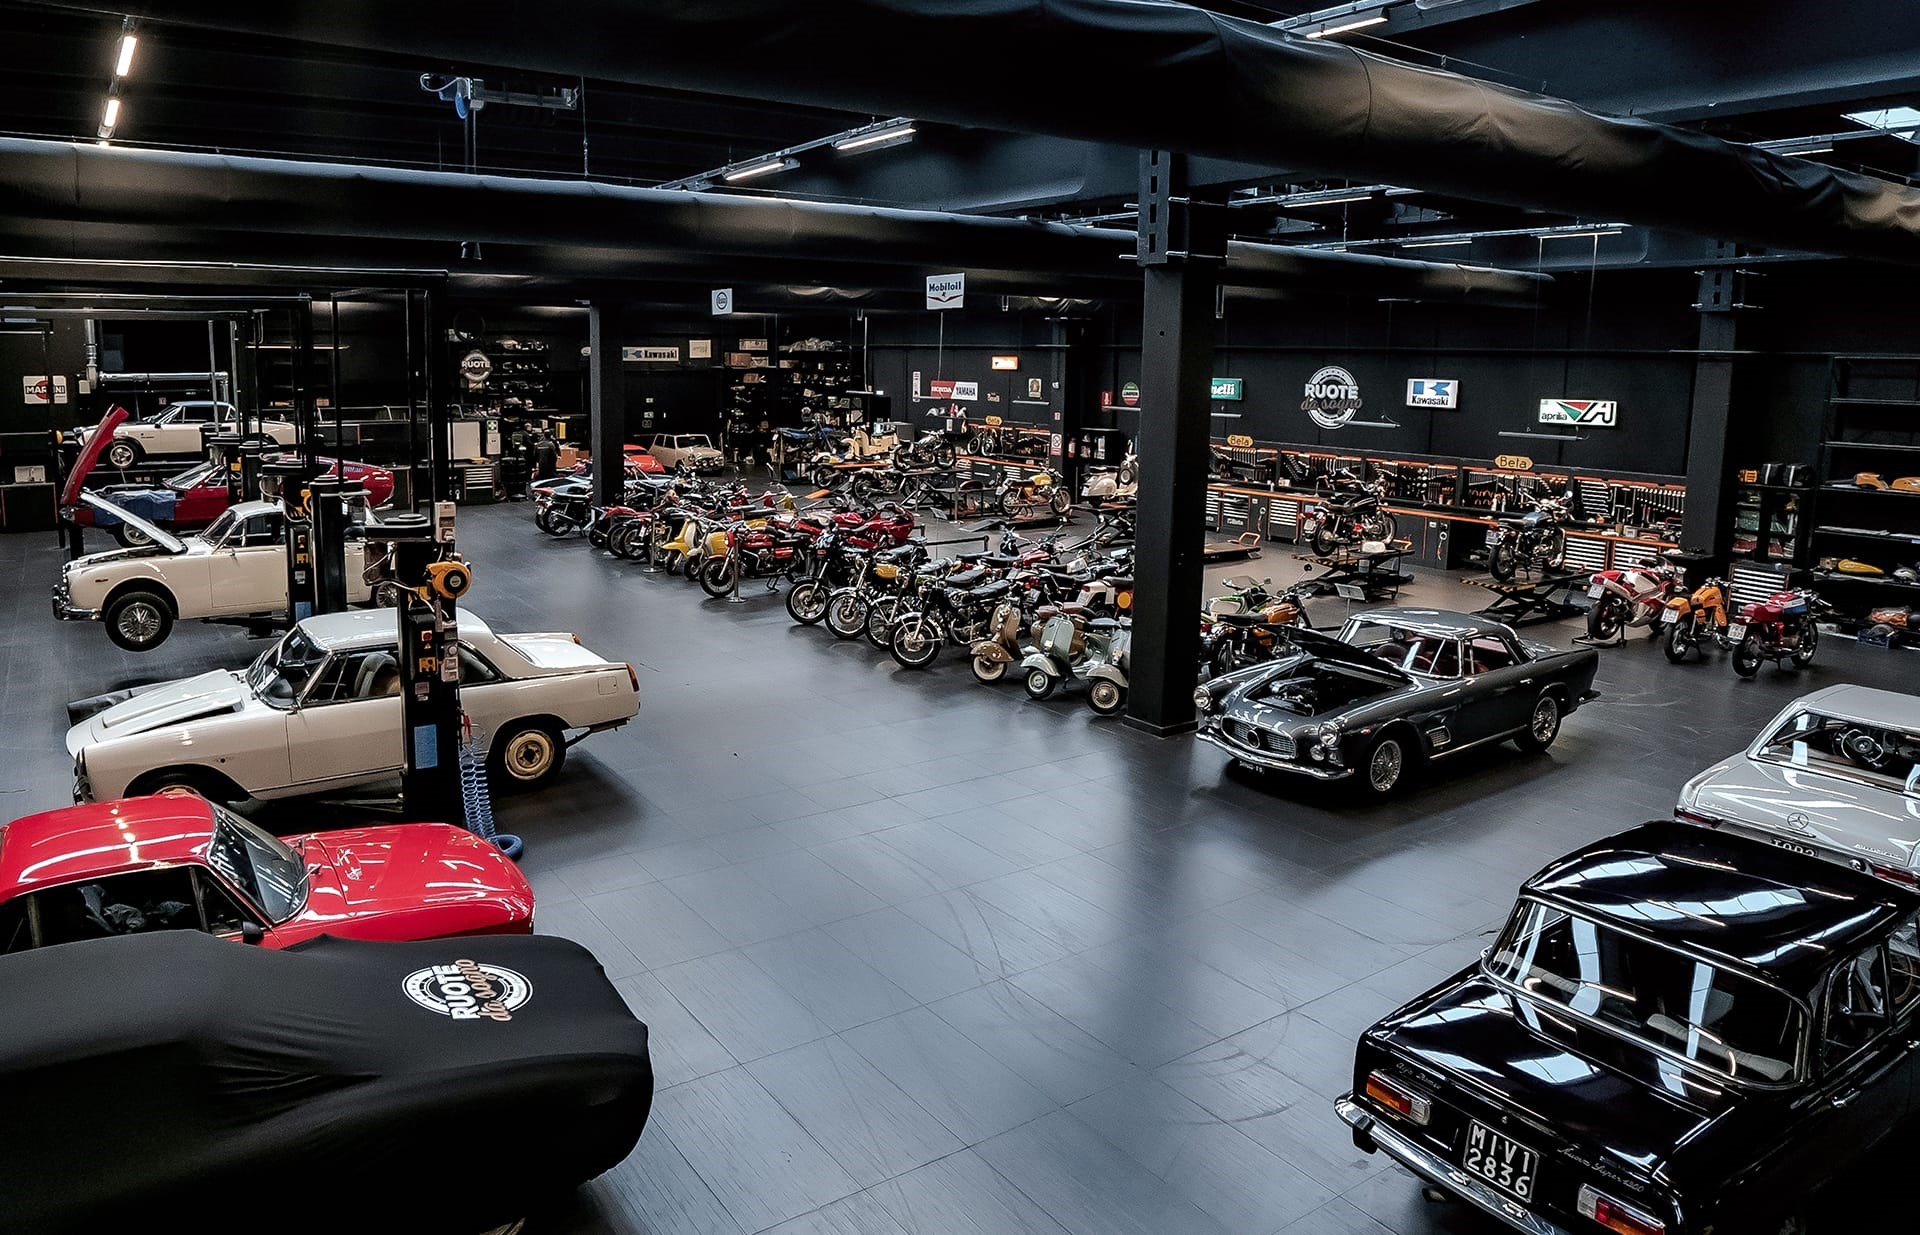 Cars and motorcycles inside Ruote da Sogno.